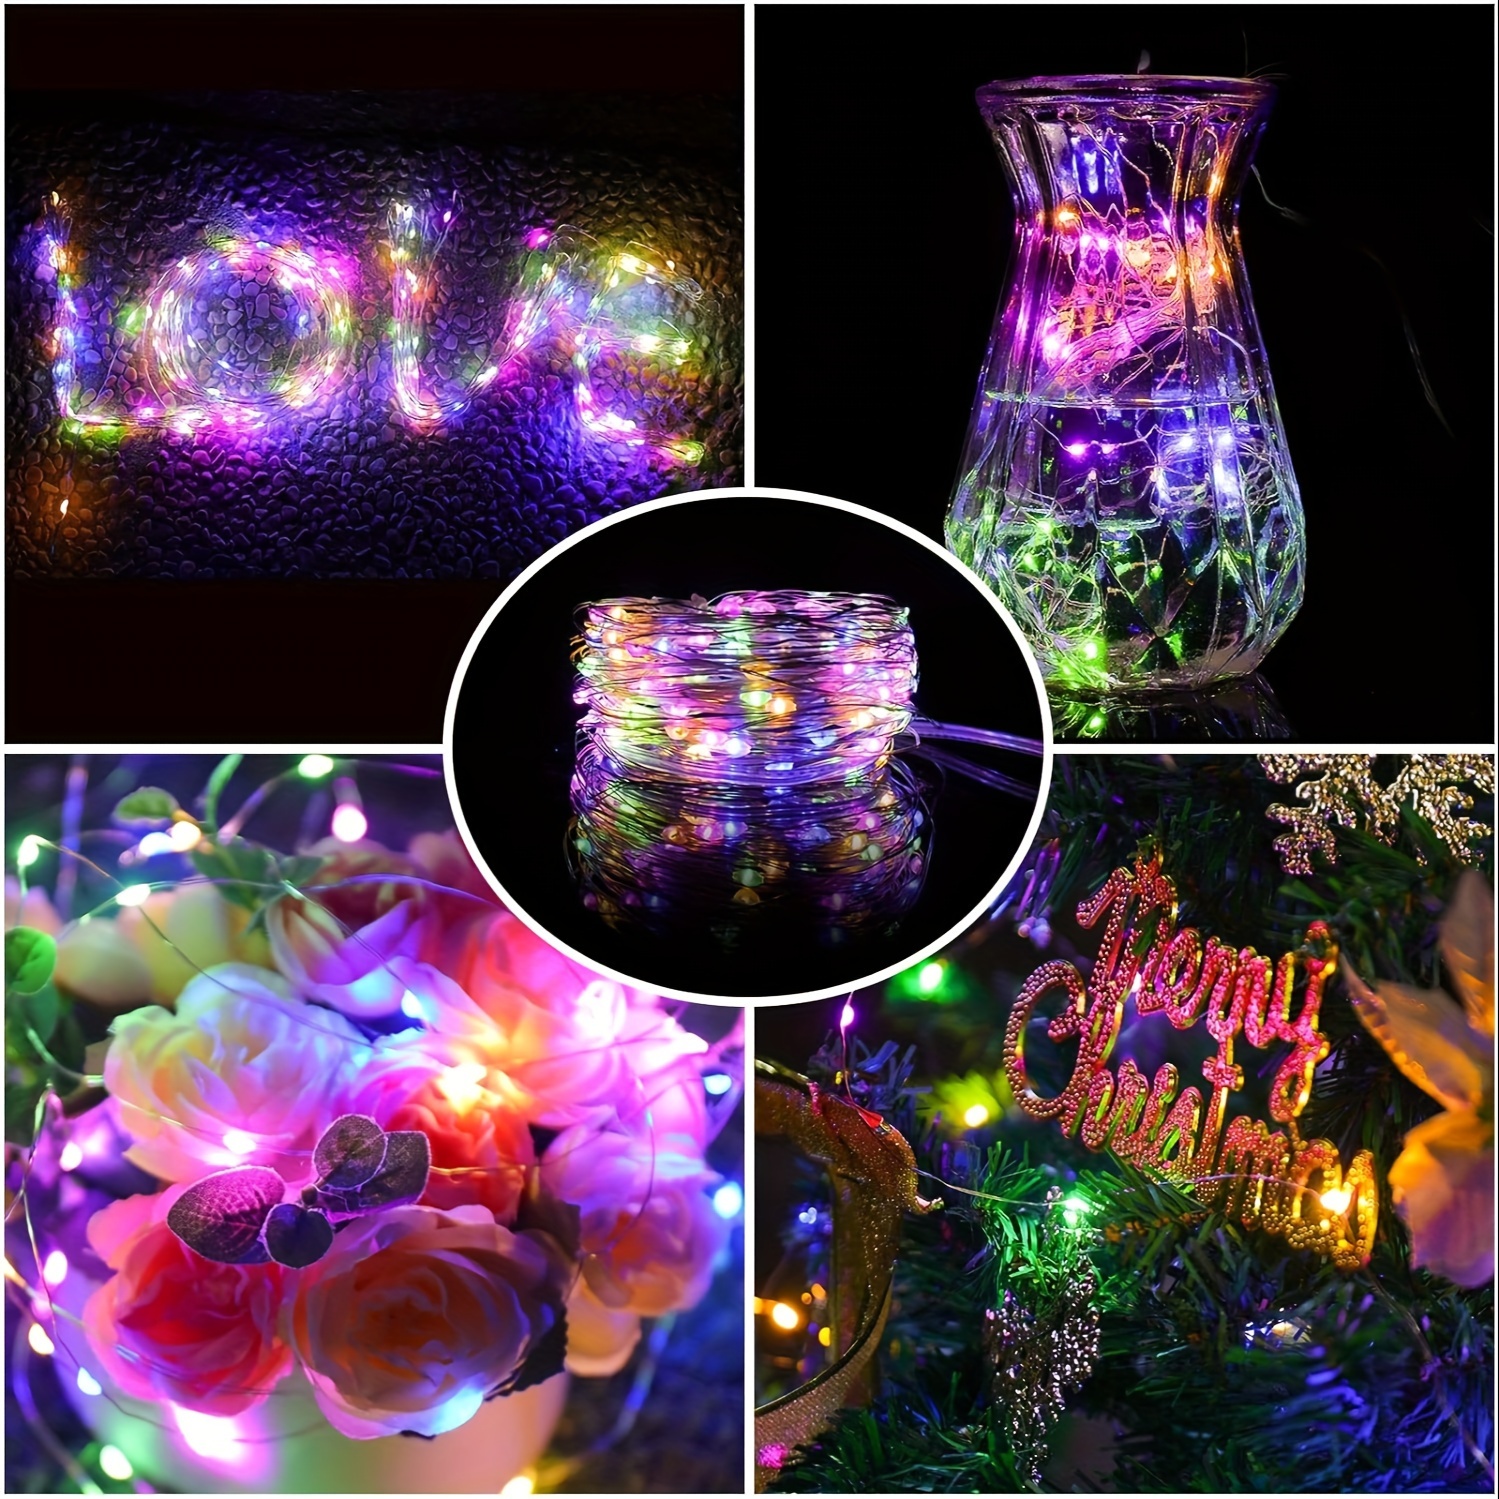 33 Feet 100 Led Fairy Lights Battery Operated with Remote Control